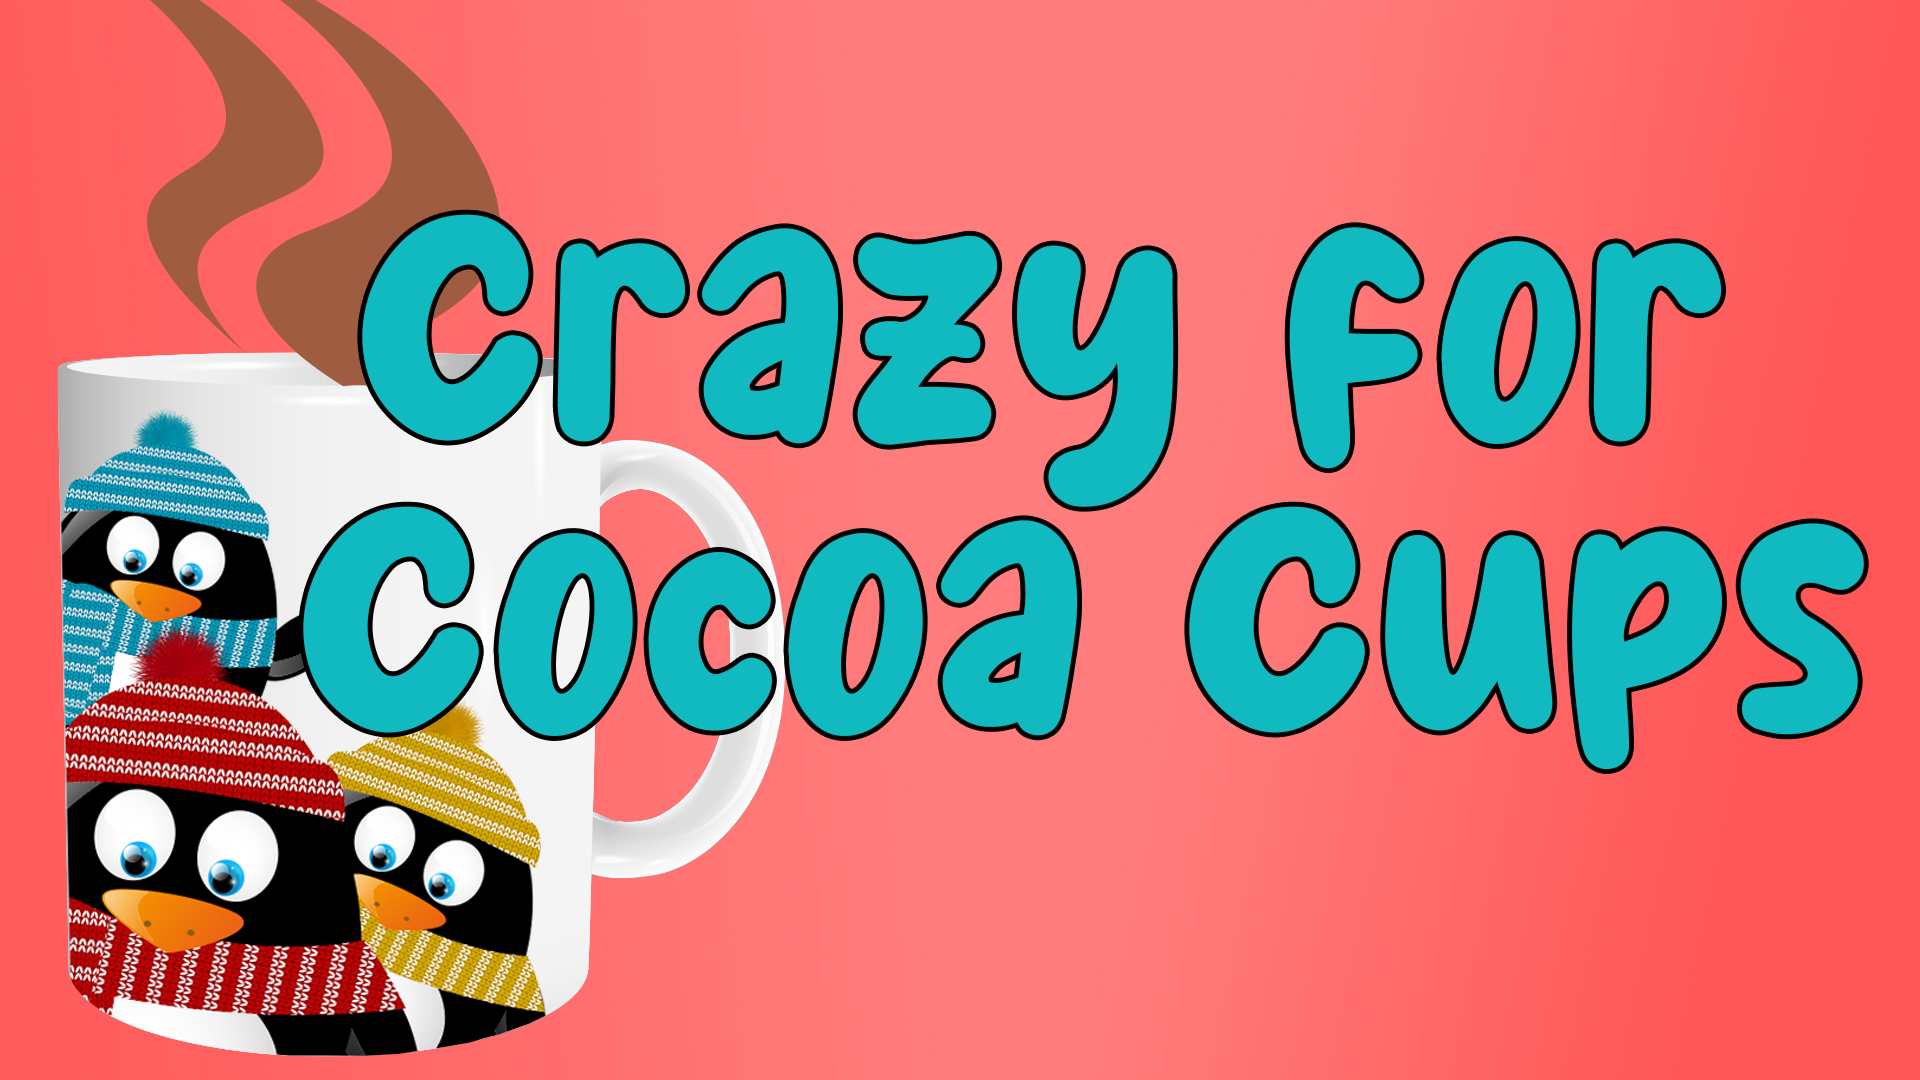 Image reads "Crazy for Cocoa Cups" in teal against a red background. A steaming mug with penguins on it is to the left and slightly behind the title.